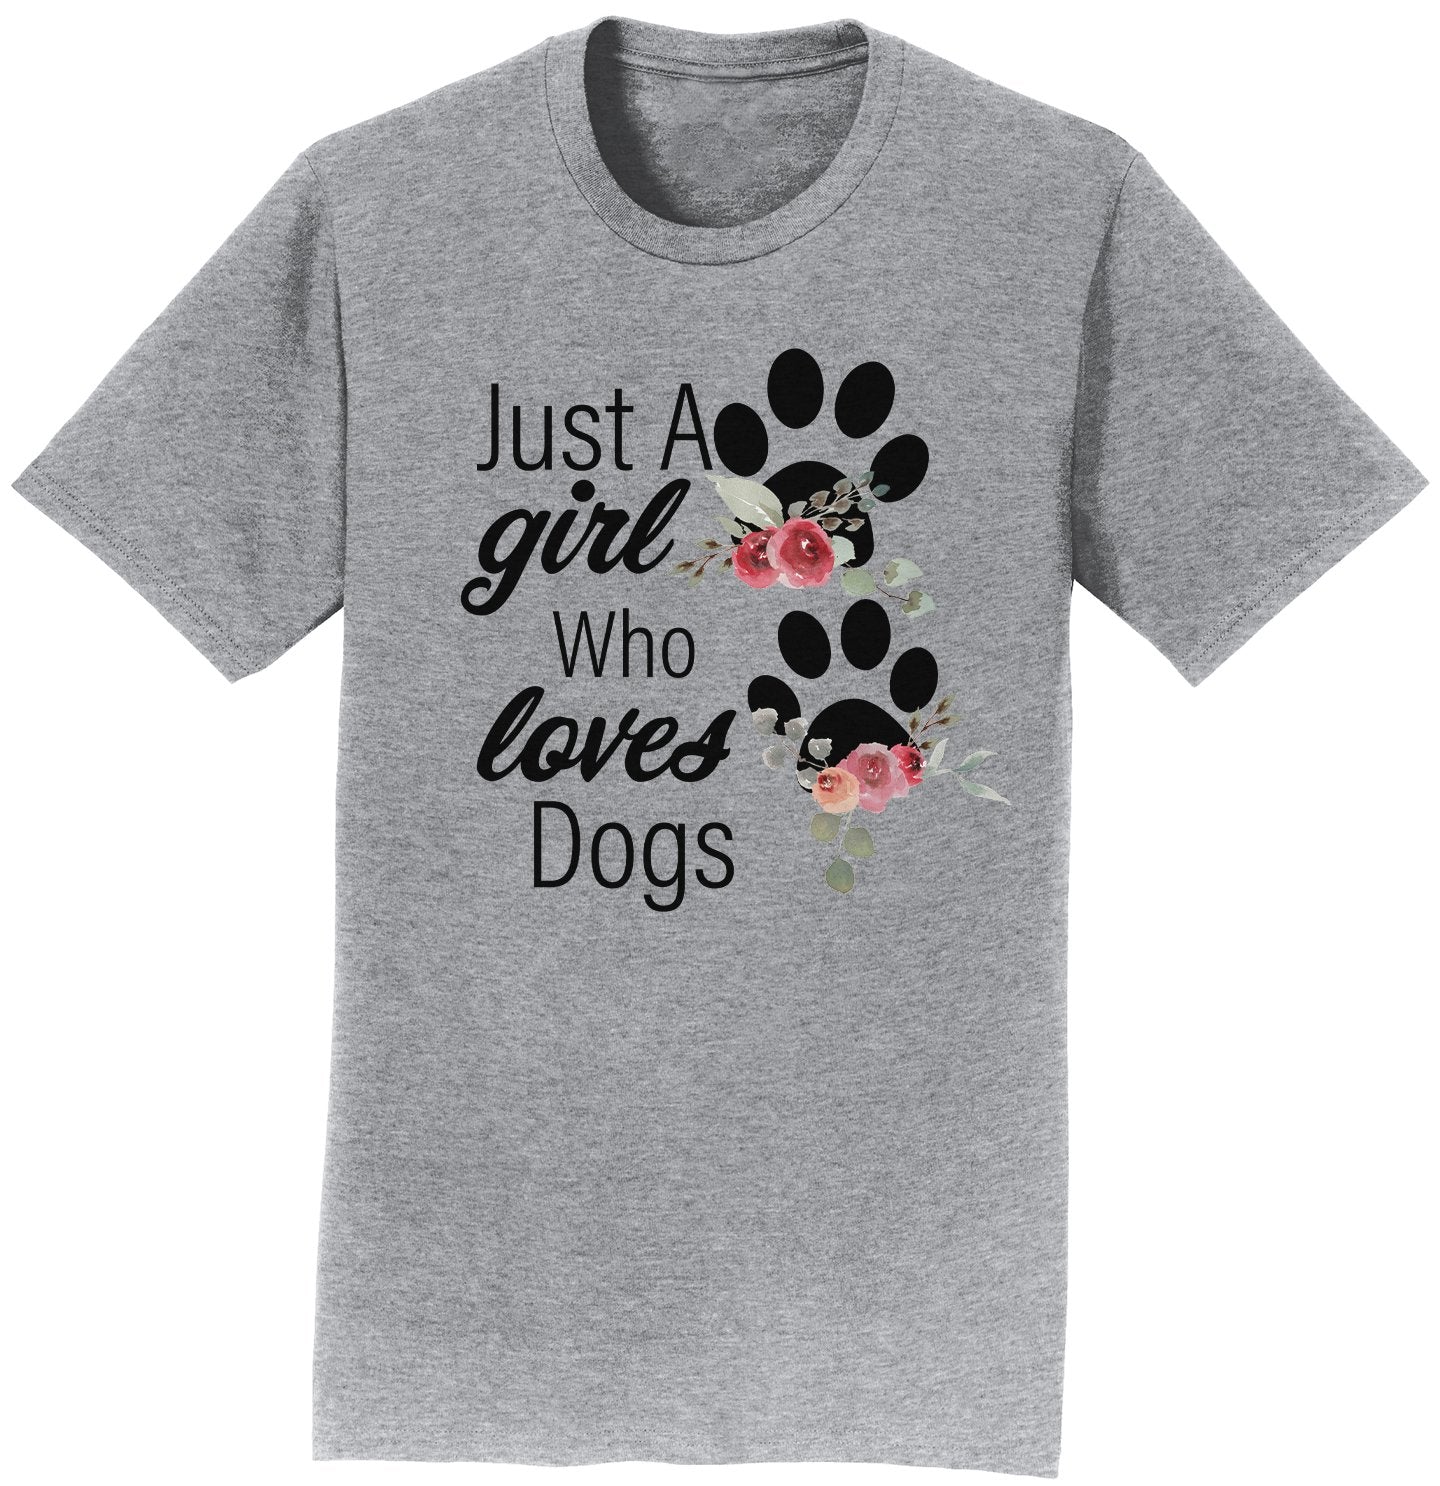 Just A Girl Who Loves Dogs - Adult Unisex T-Shirt